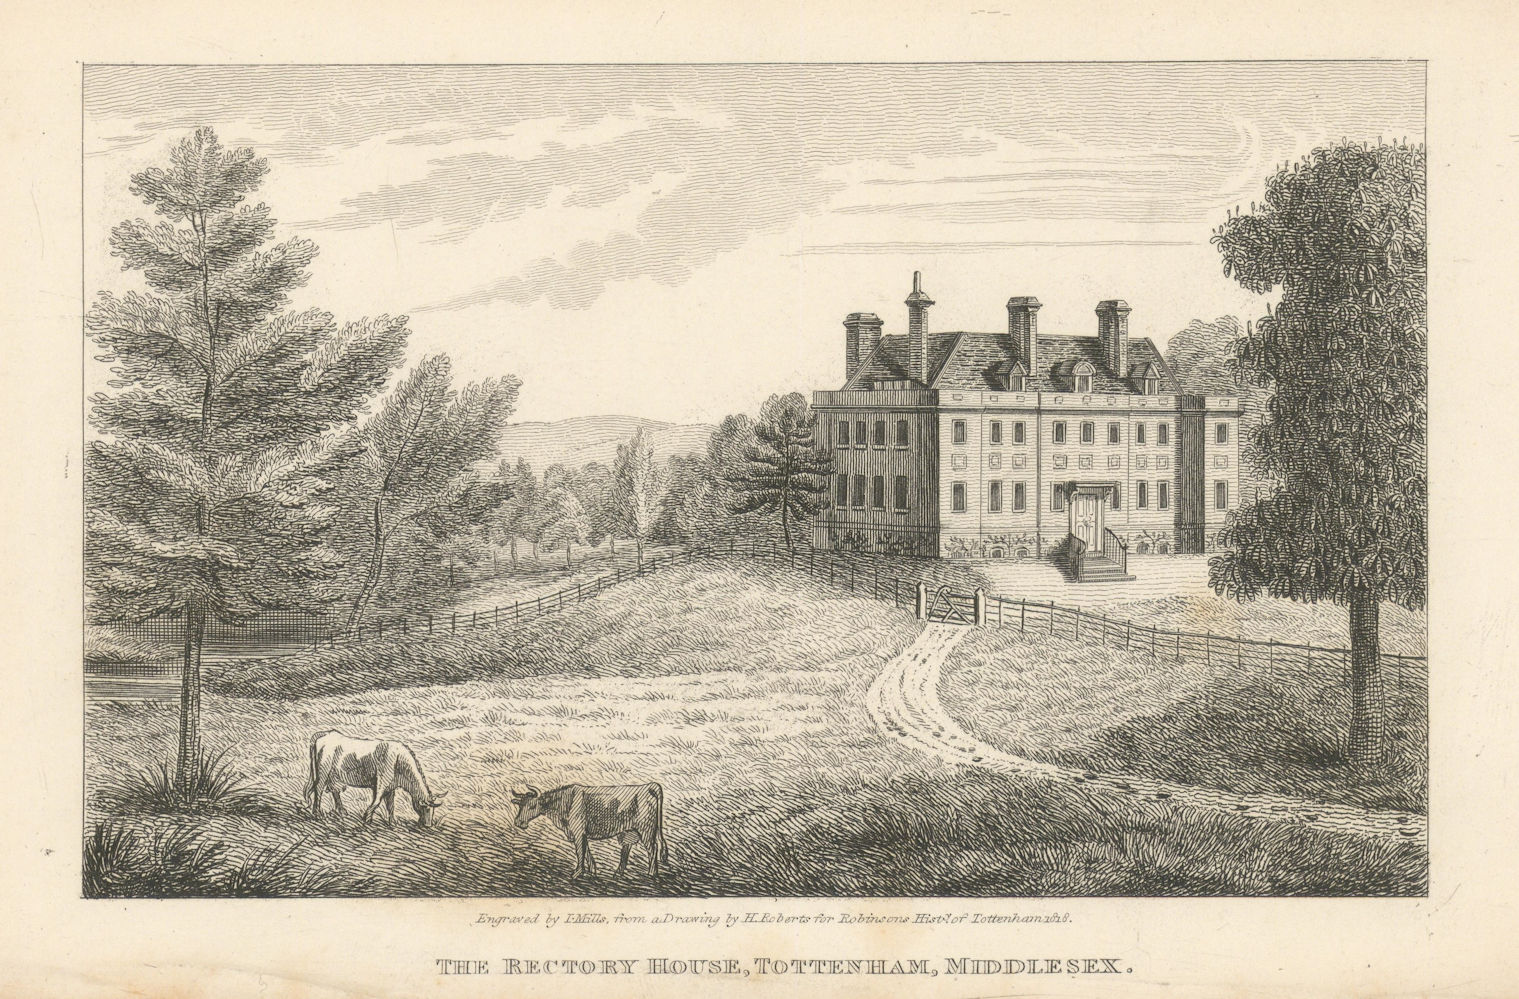 The Rectory House, Tottenham. Pembroke Rectorial Manor House 1840 old print